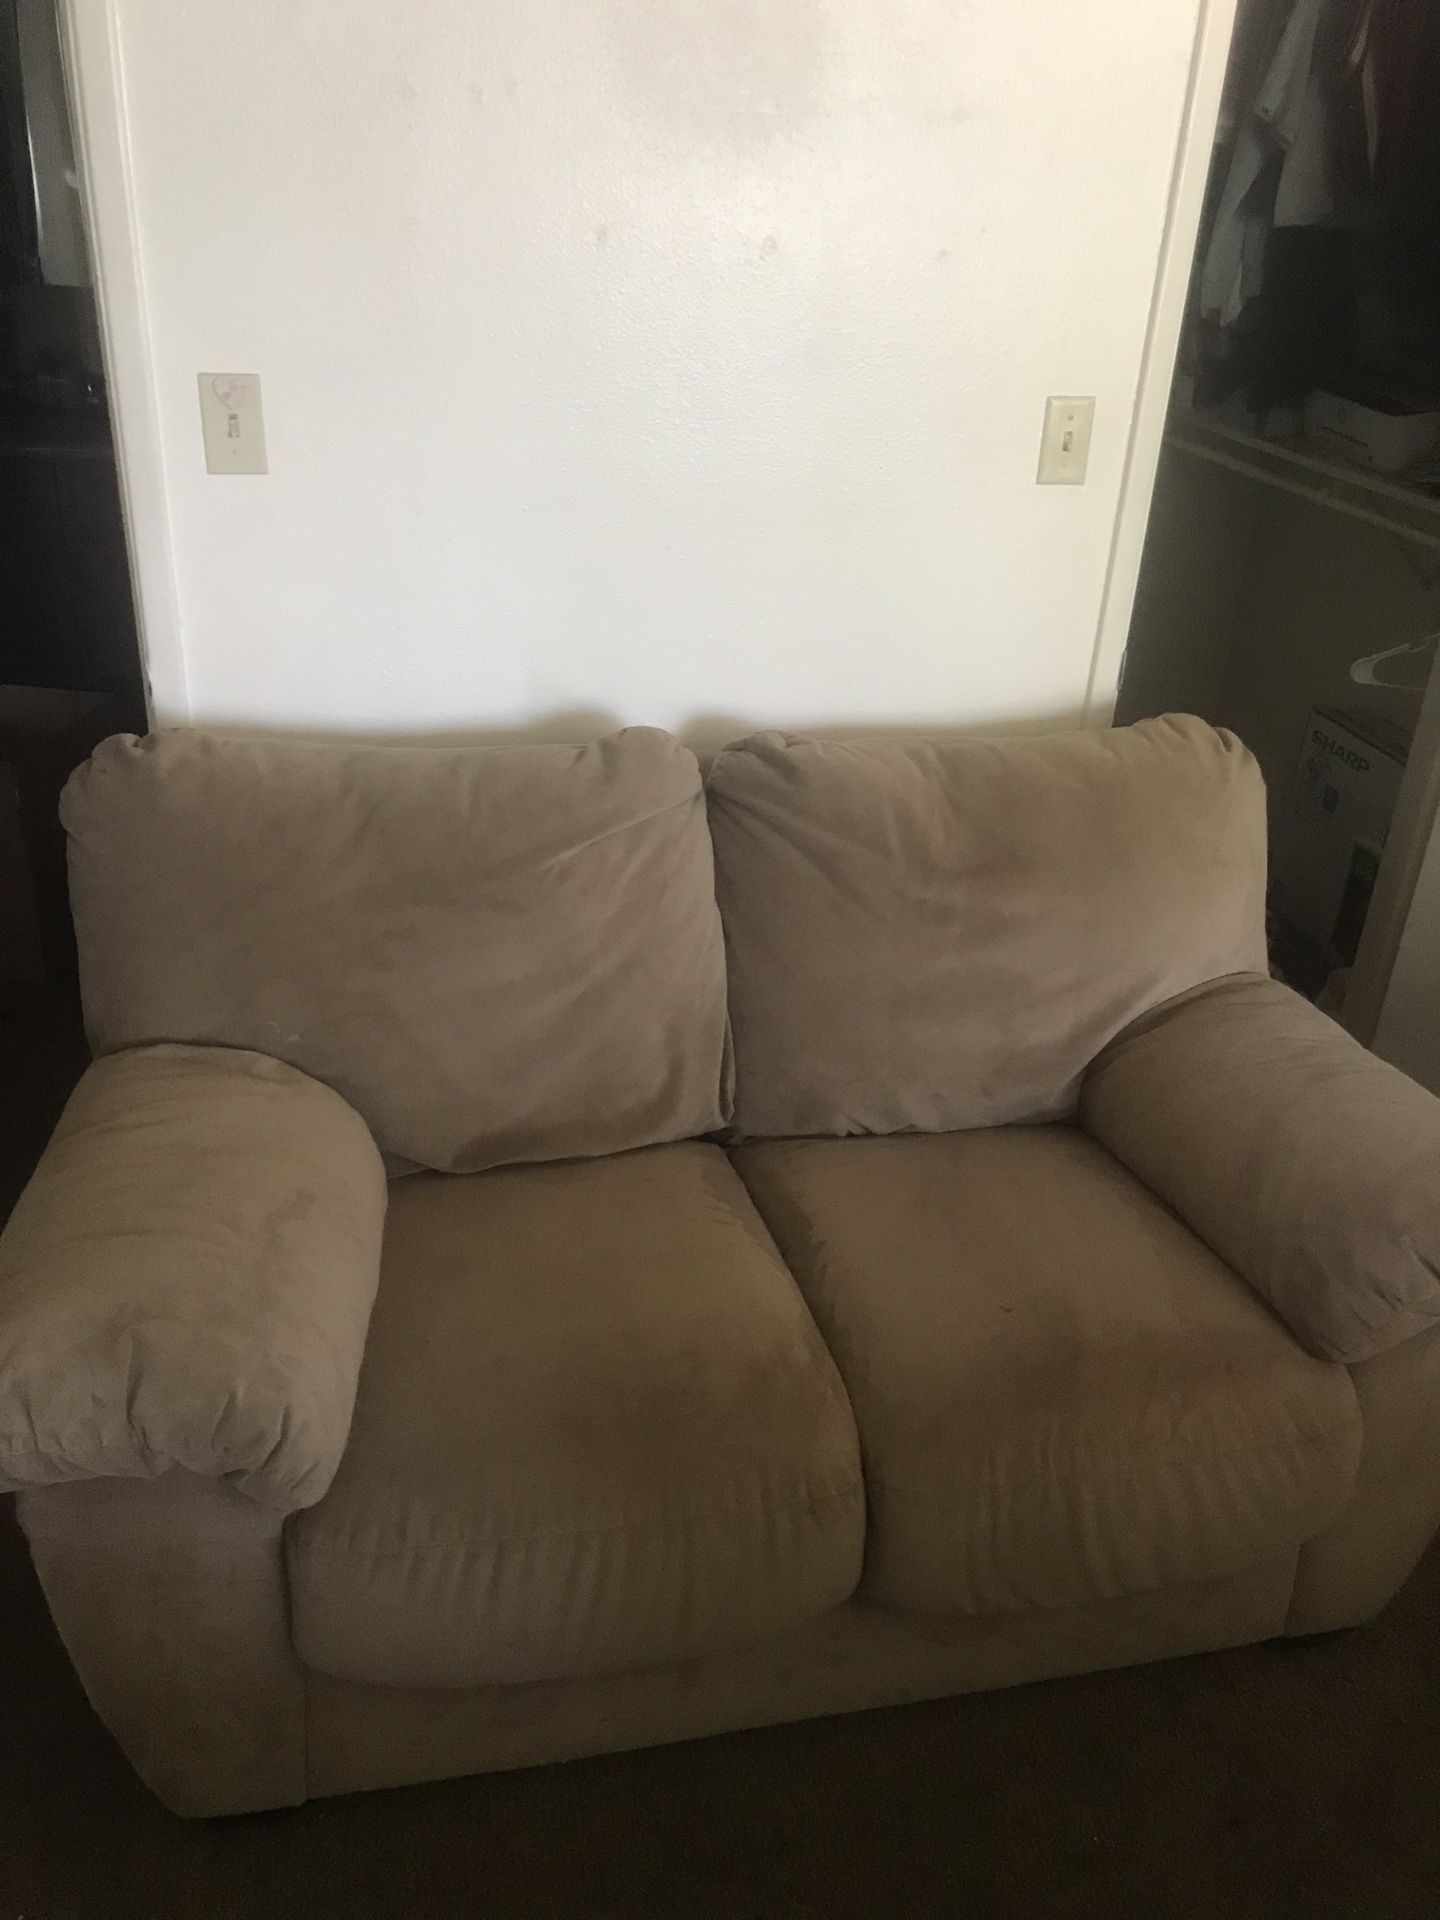 Small Love couch